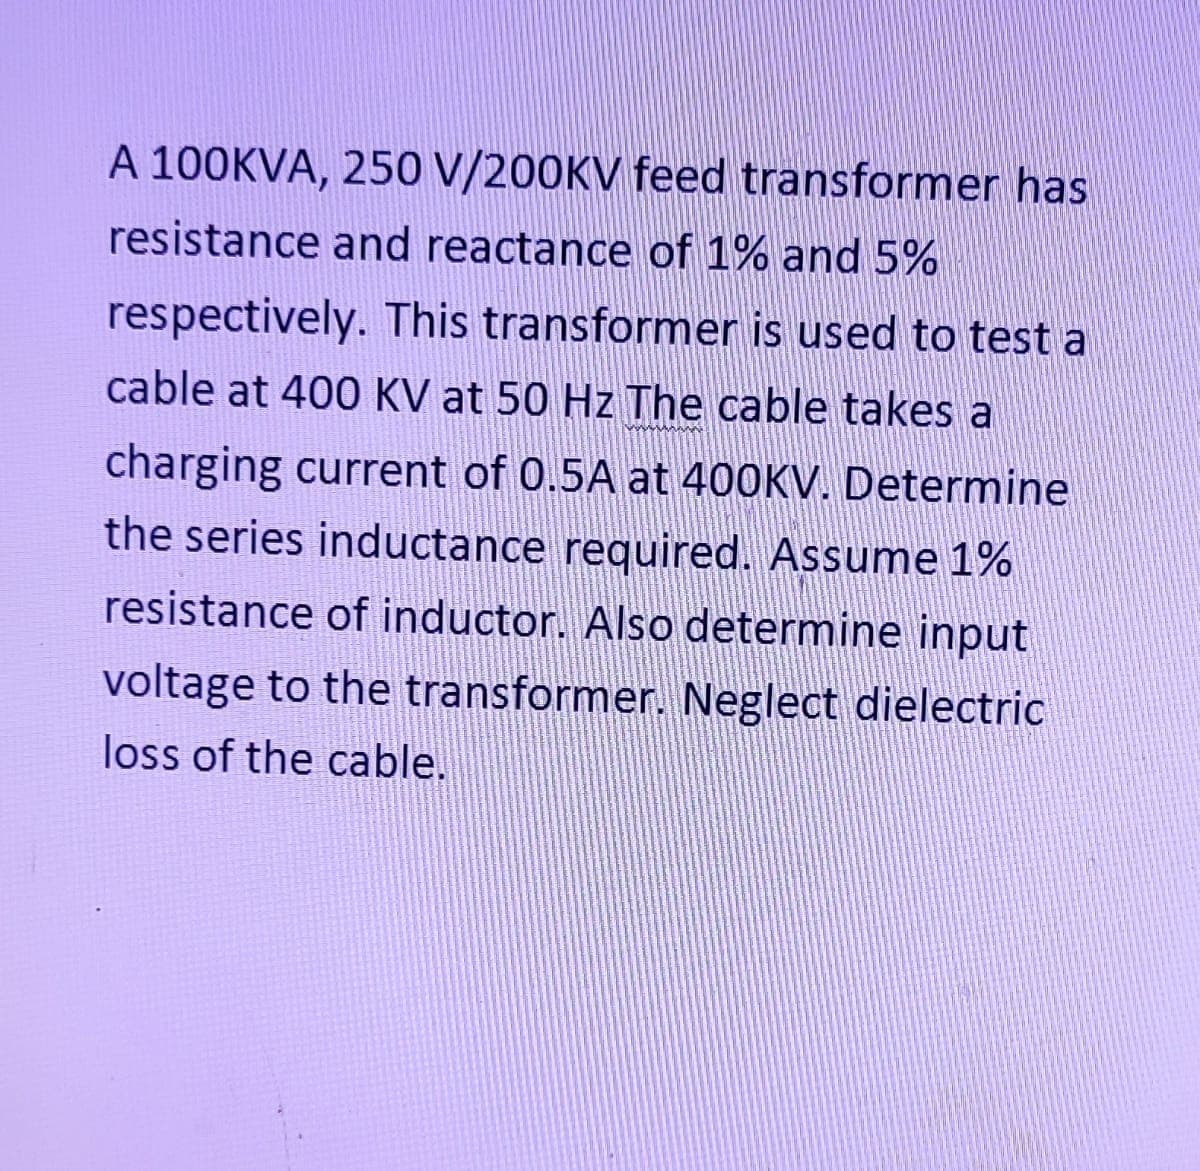 A 100KVA, 250 V/200KV feed transformer has
resistance and reactance of 1% and 5%
respectively. This transformer is used to test a
cable at 400 KV at 50 Hz The cable takes a
charging current of 0.5A at 400KV. Determine
the series inductance required. Assume 1%
resistance of inductor. Also determine input
voltage to the transformer. Neglect dielectric
loss of the cable.